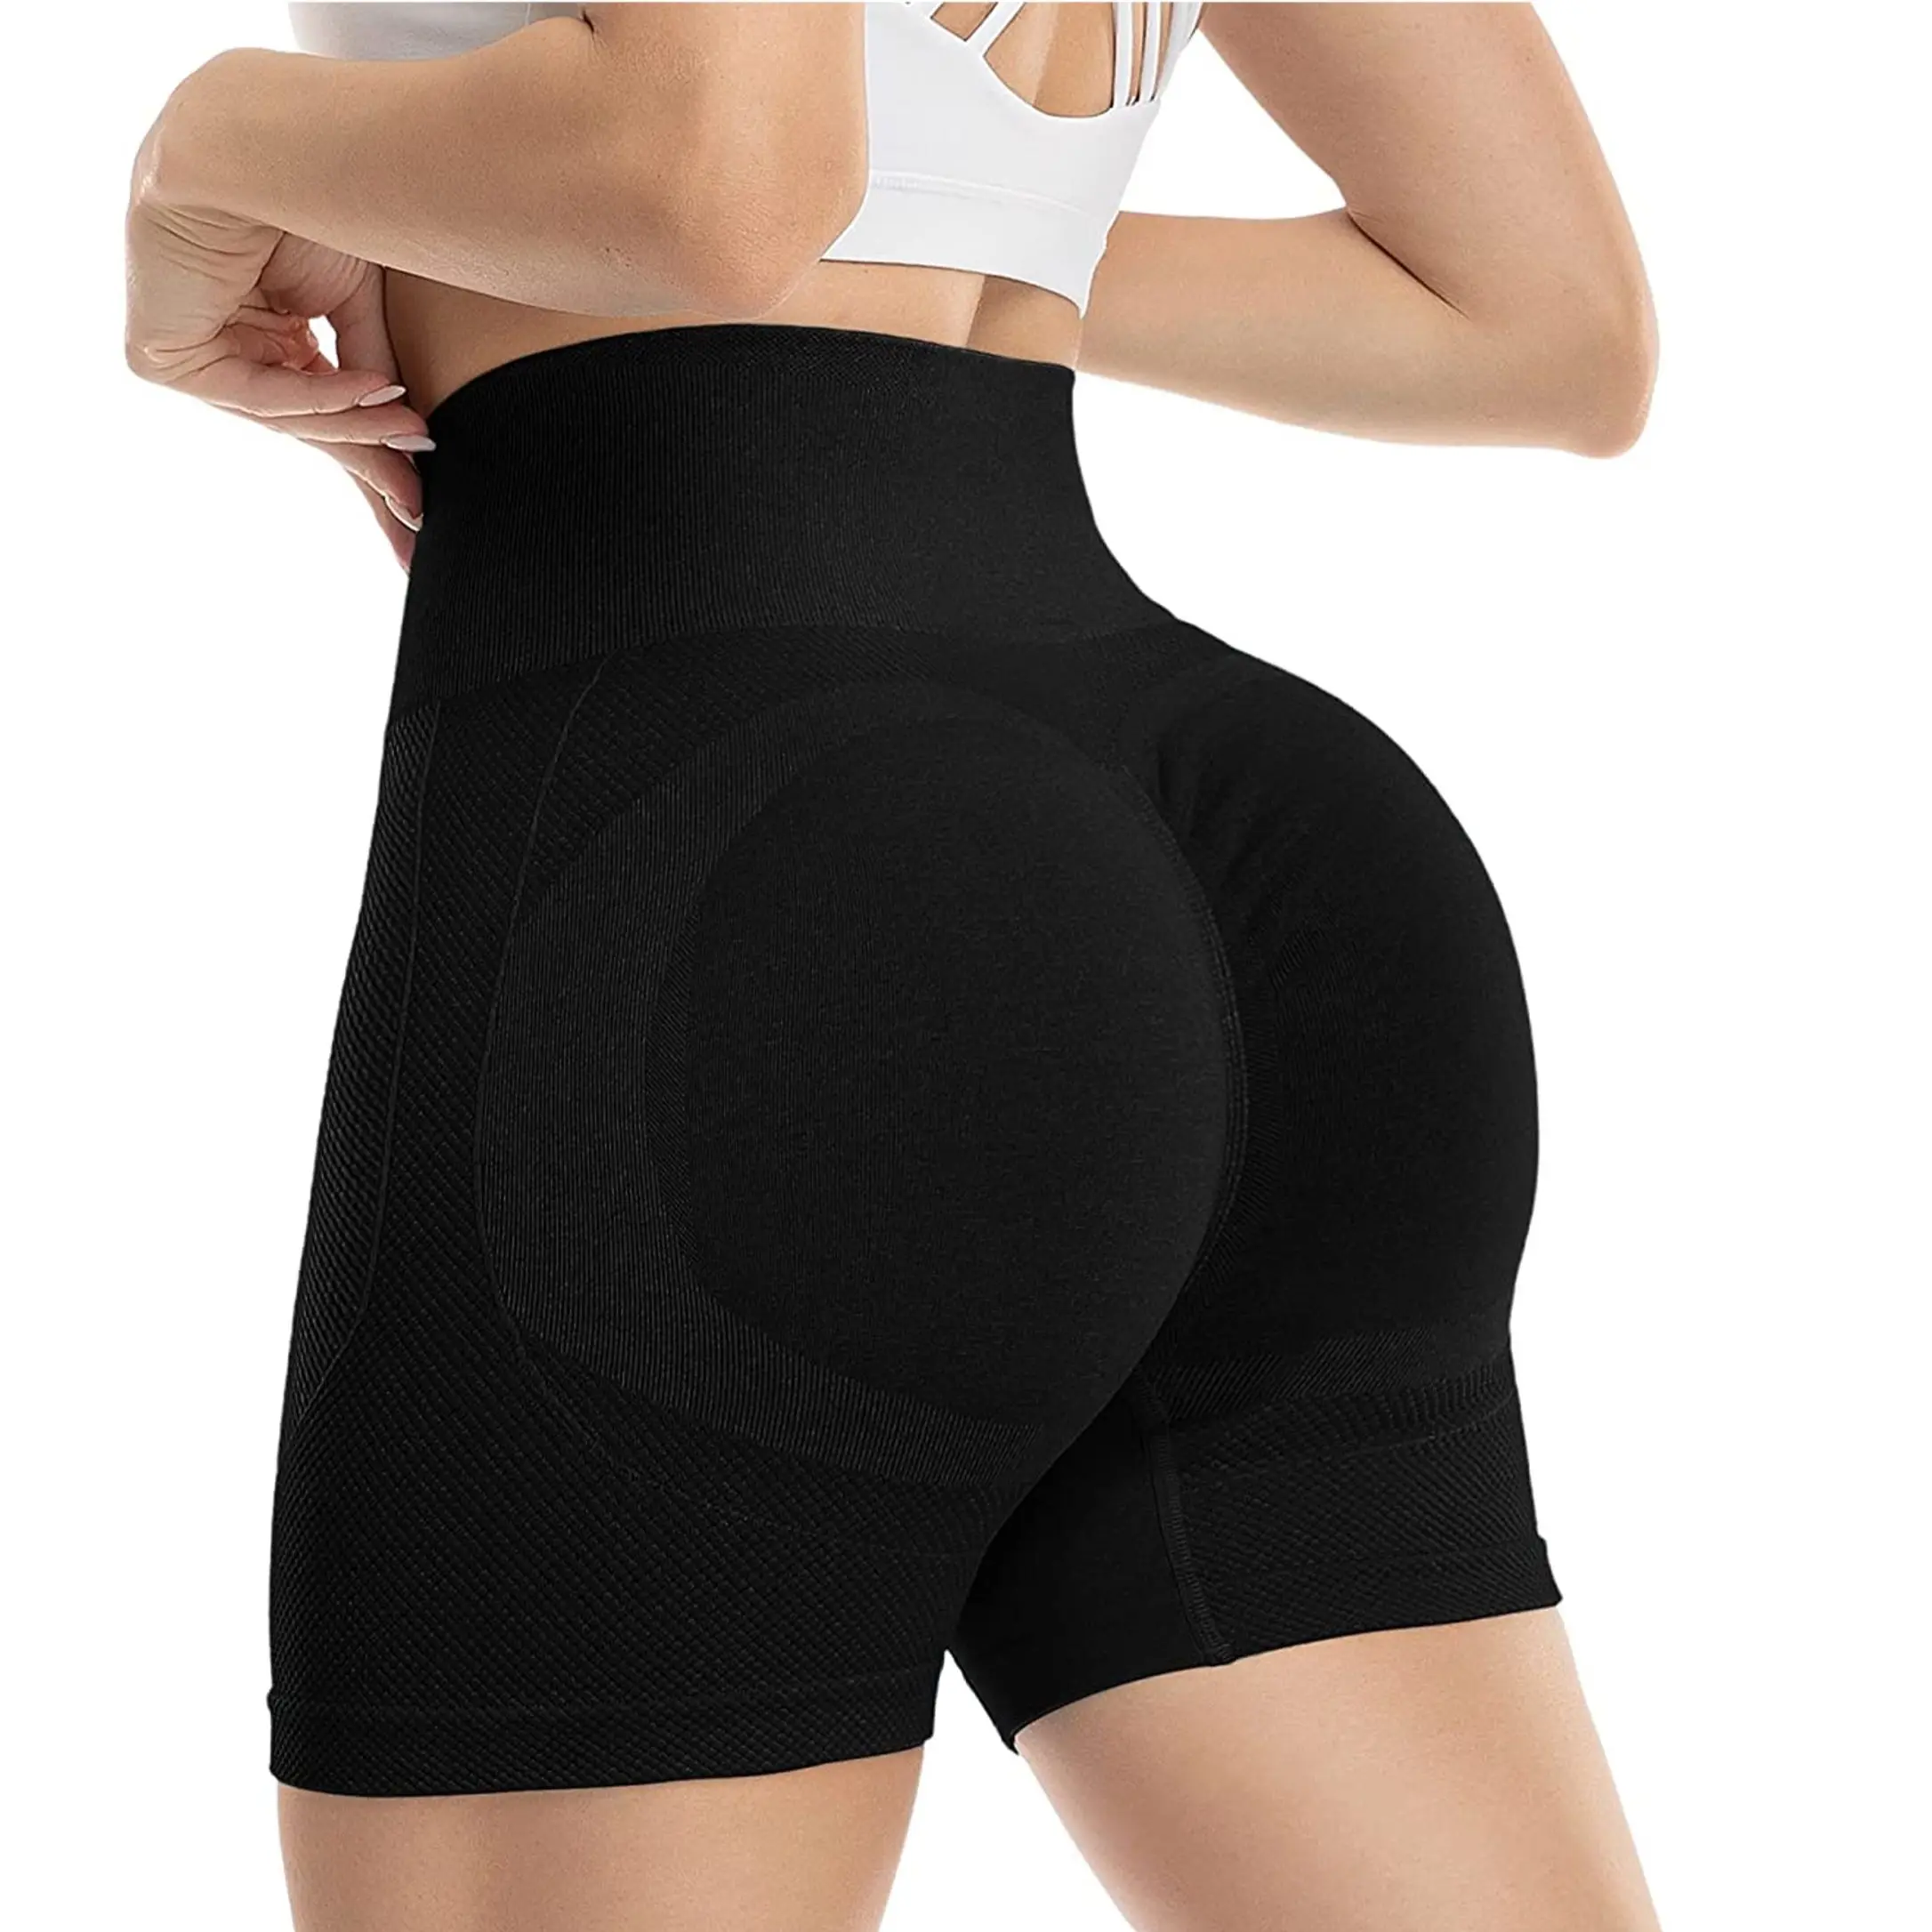  - Seamless Sports Leggings for Women Pants Tights Woman Clothes High Waist Workout Scrunch Leggings Fitness Gym Wear